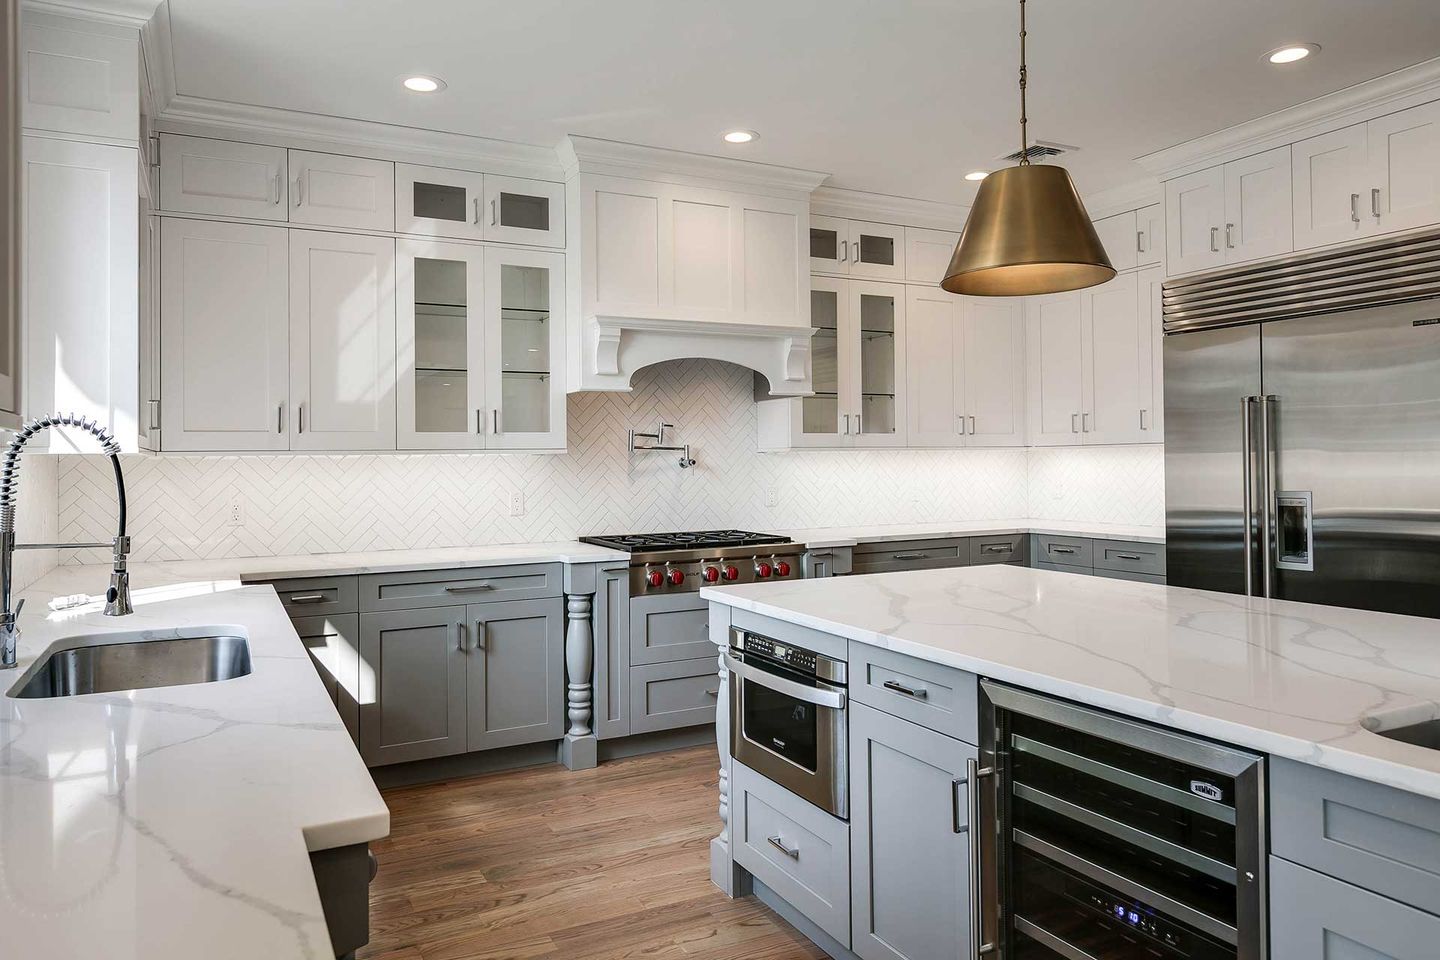 LPS Kitchen Cabinets - Farmingdale, NY - Transitional Kitchen Cabinets